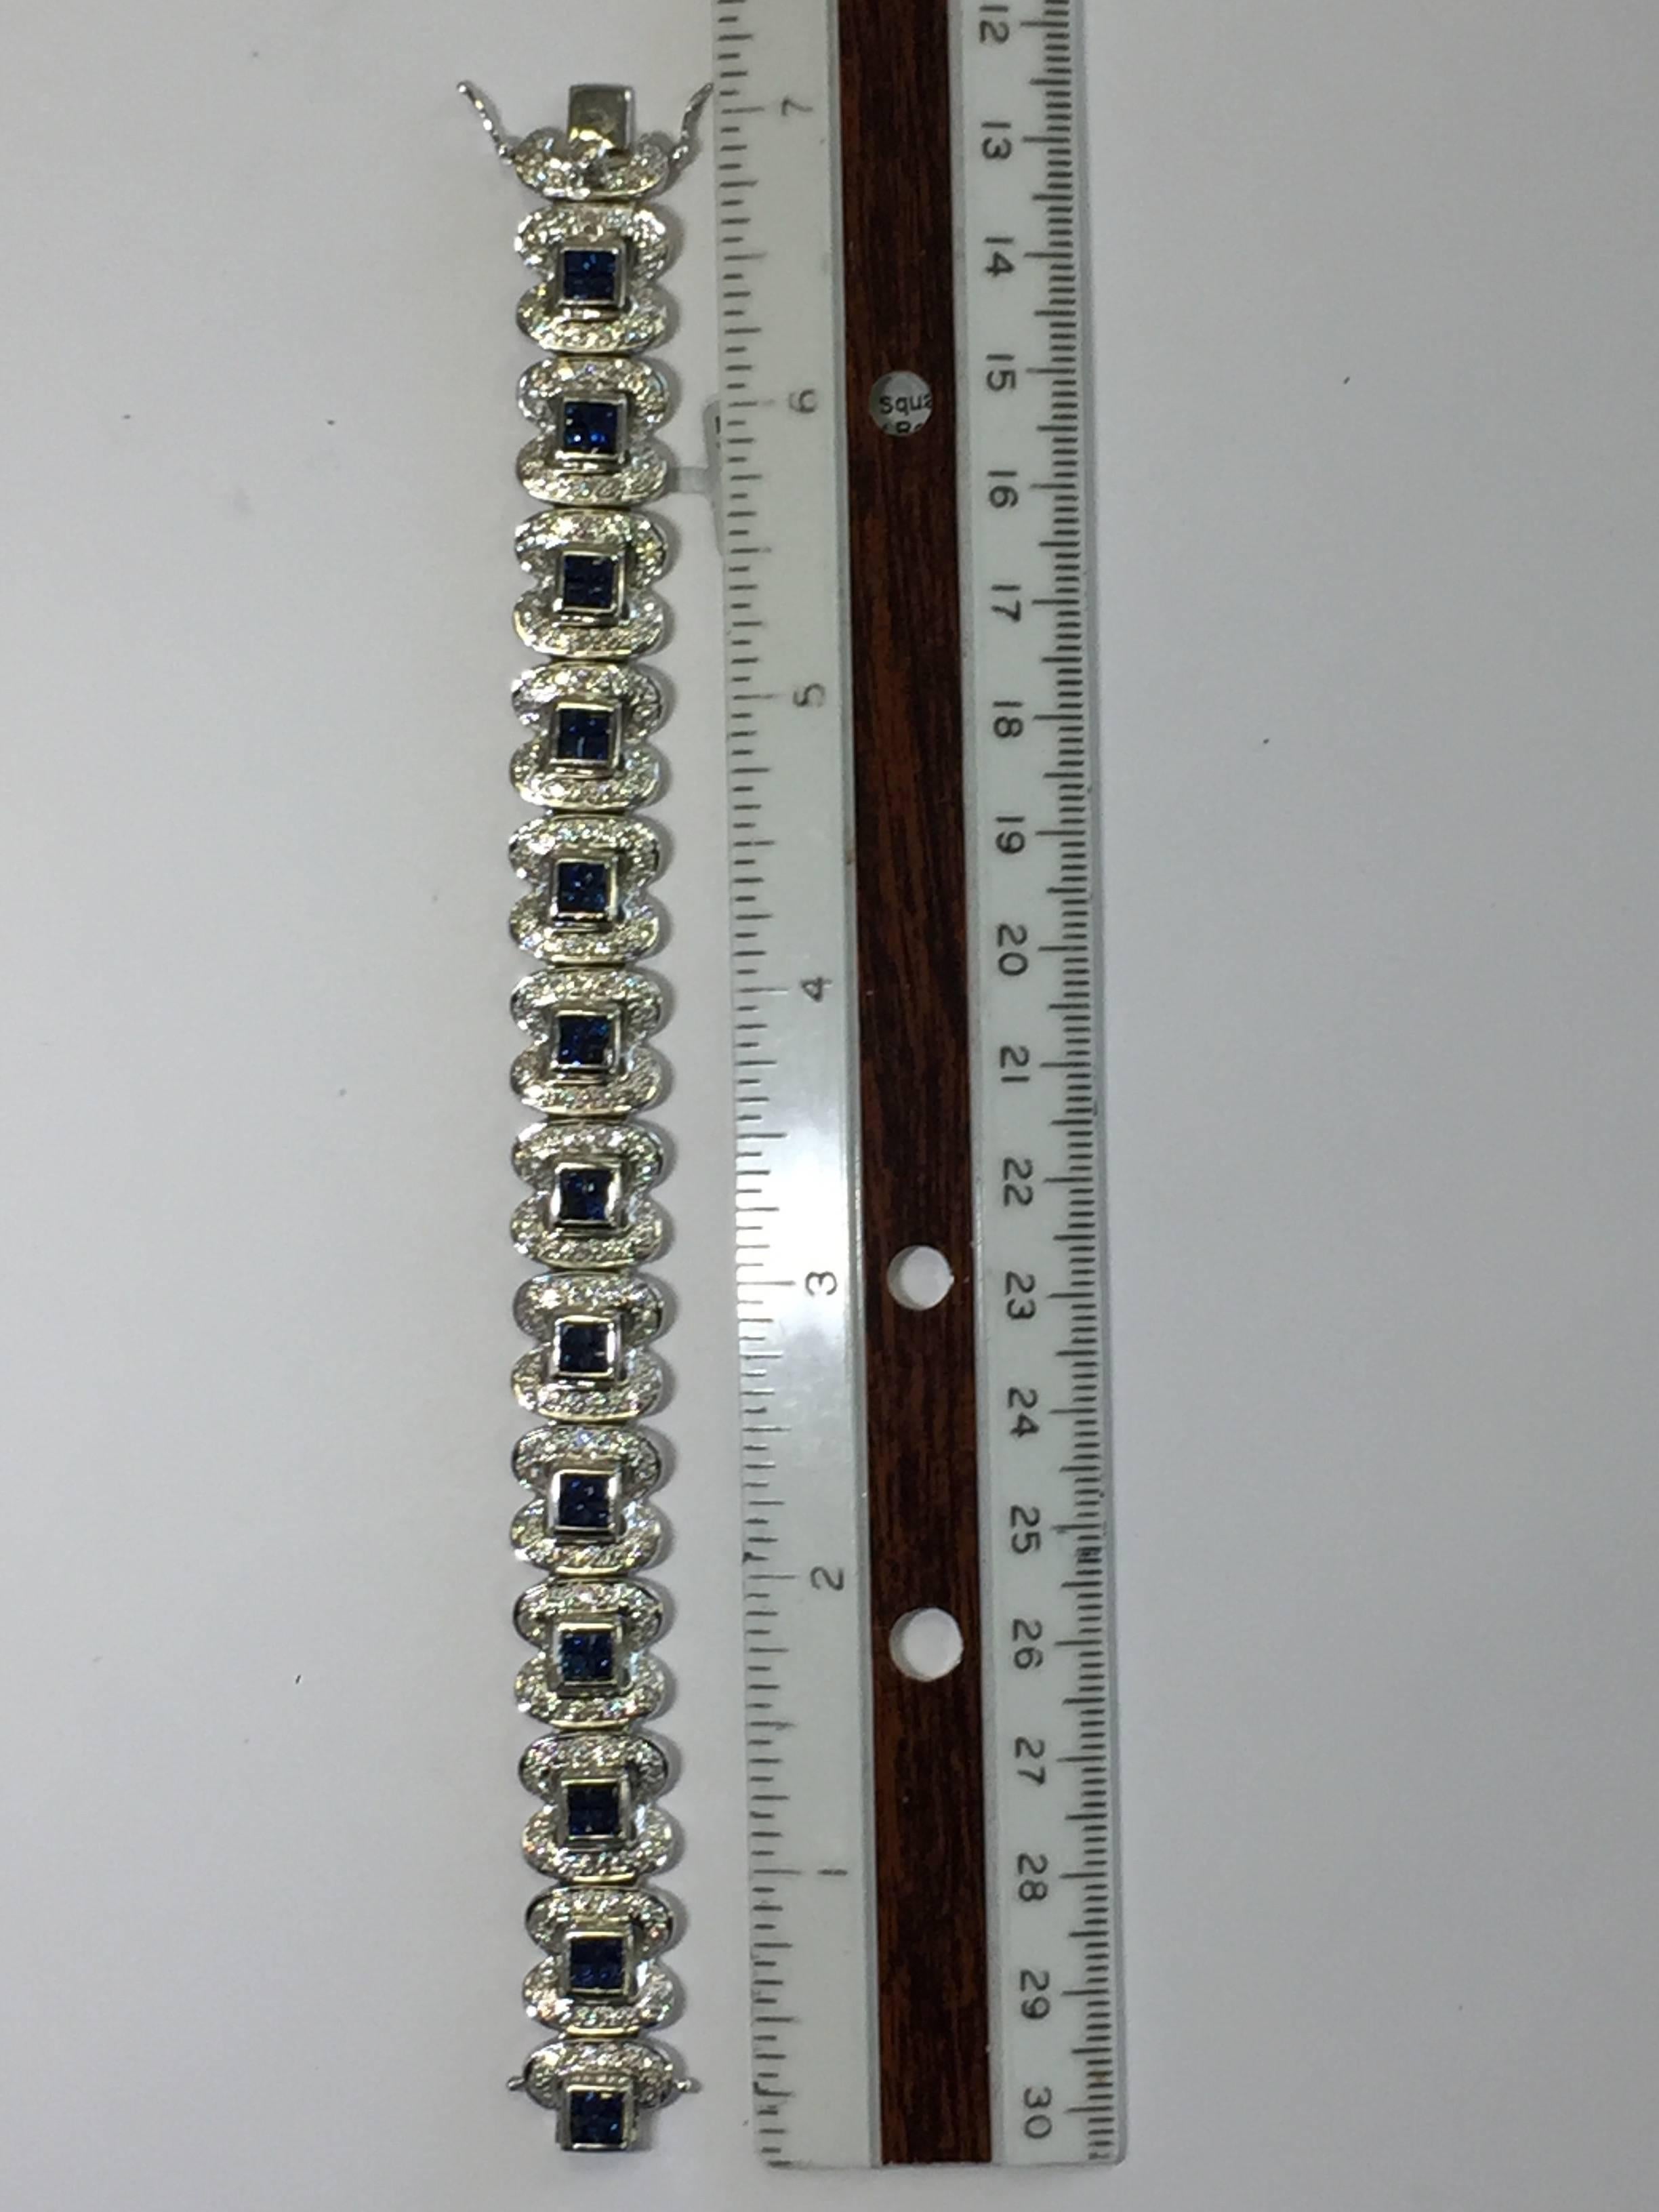 Stunning blue sapphire squares (care cuts) and white diamond 18k white gold bracelet that is 7 inches long.  